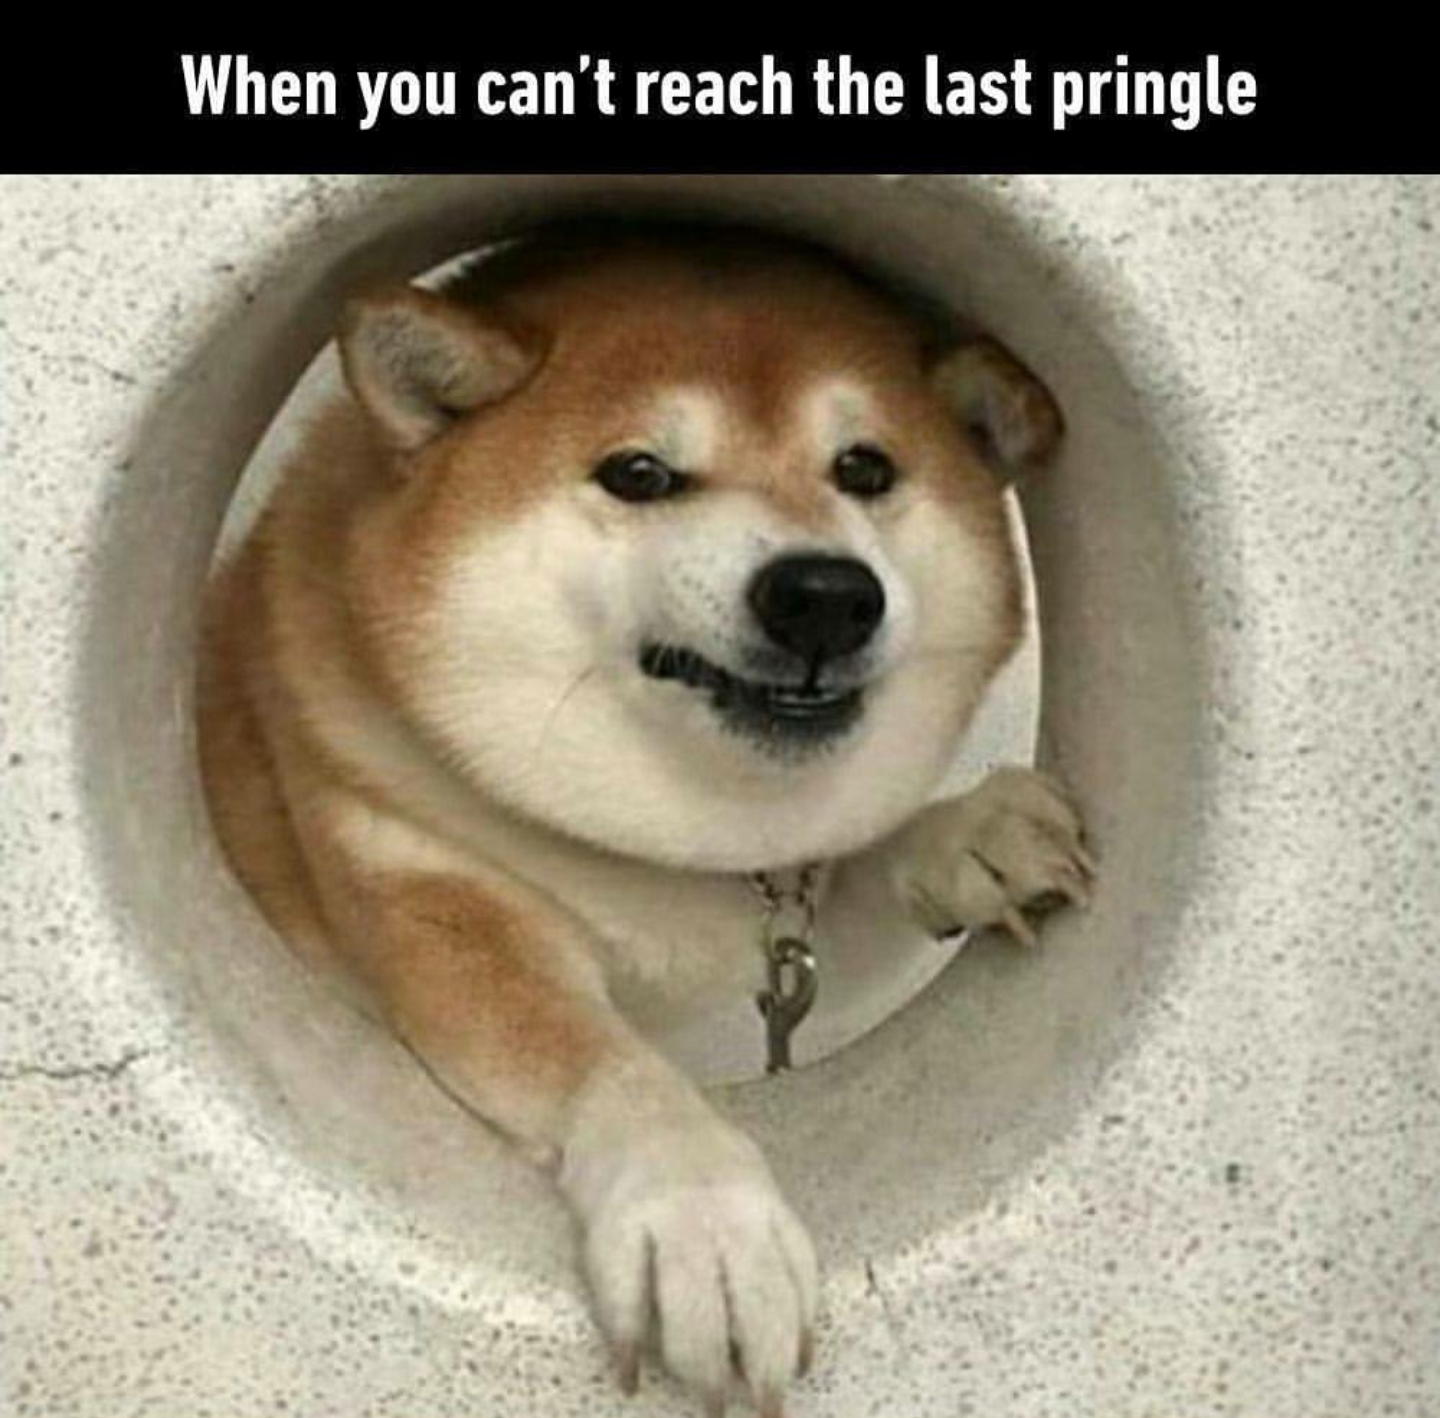 memes  - my last pringle sees - When you can't reach the last pringle